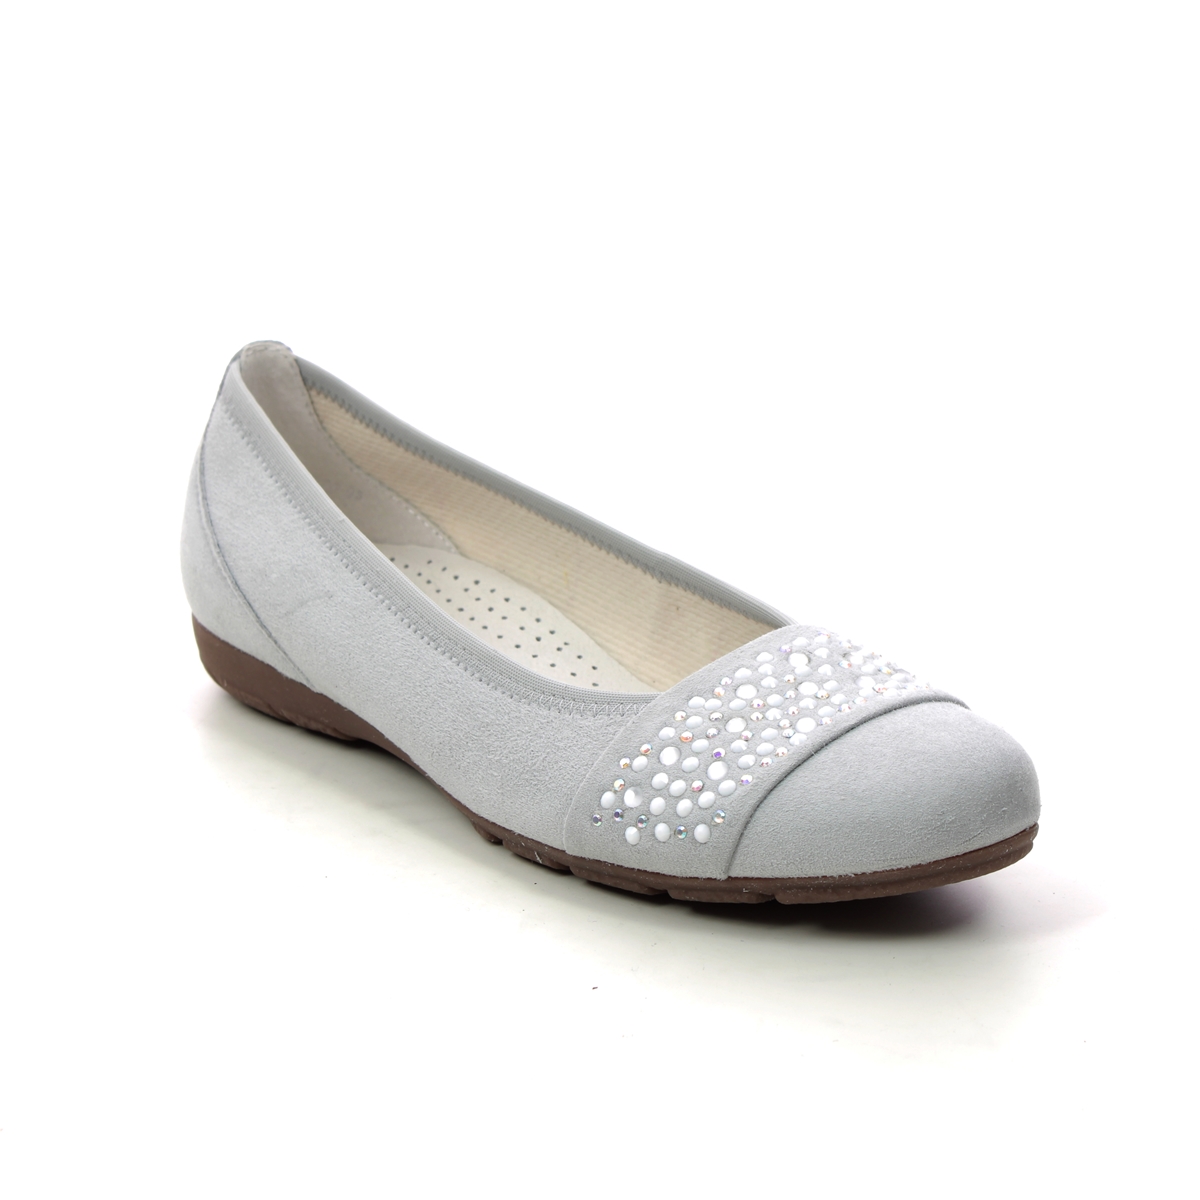 Gabor Rae Hovercraft Light Grey Suede Womens pumps 24.167.19 in a Plain Leather in Size 4.5